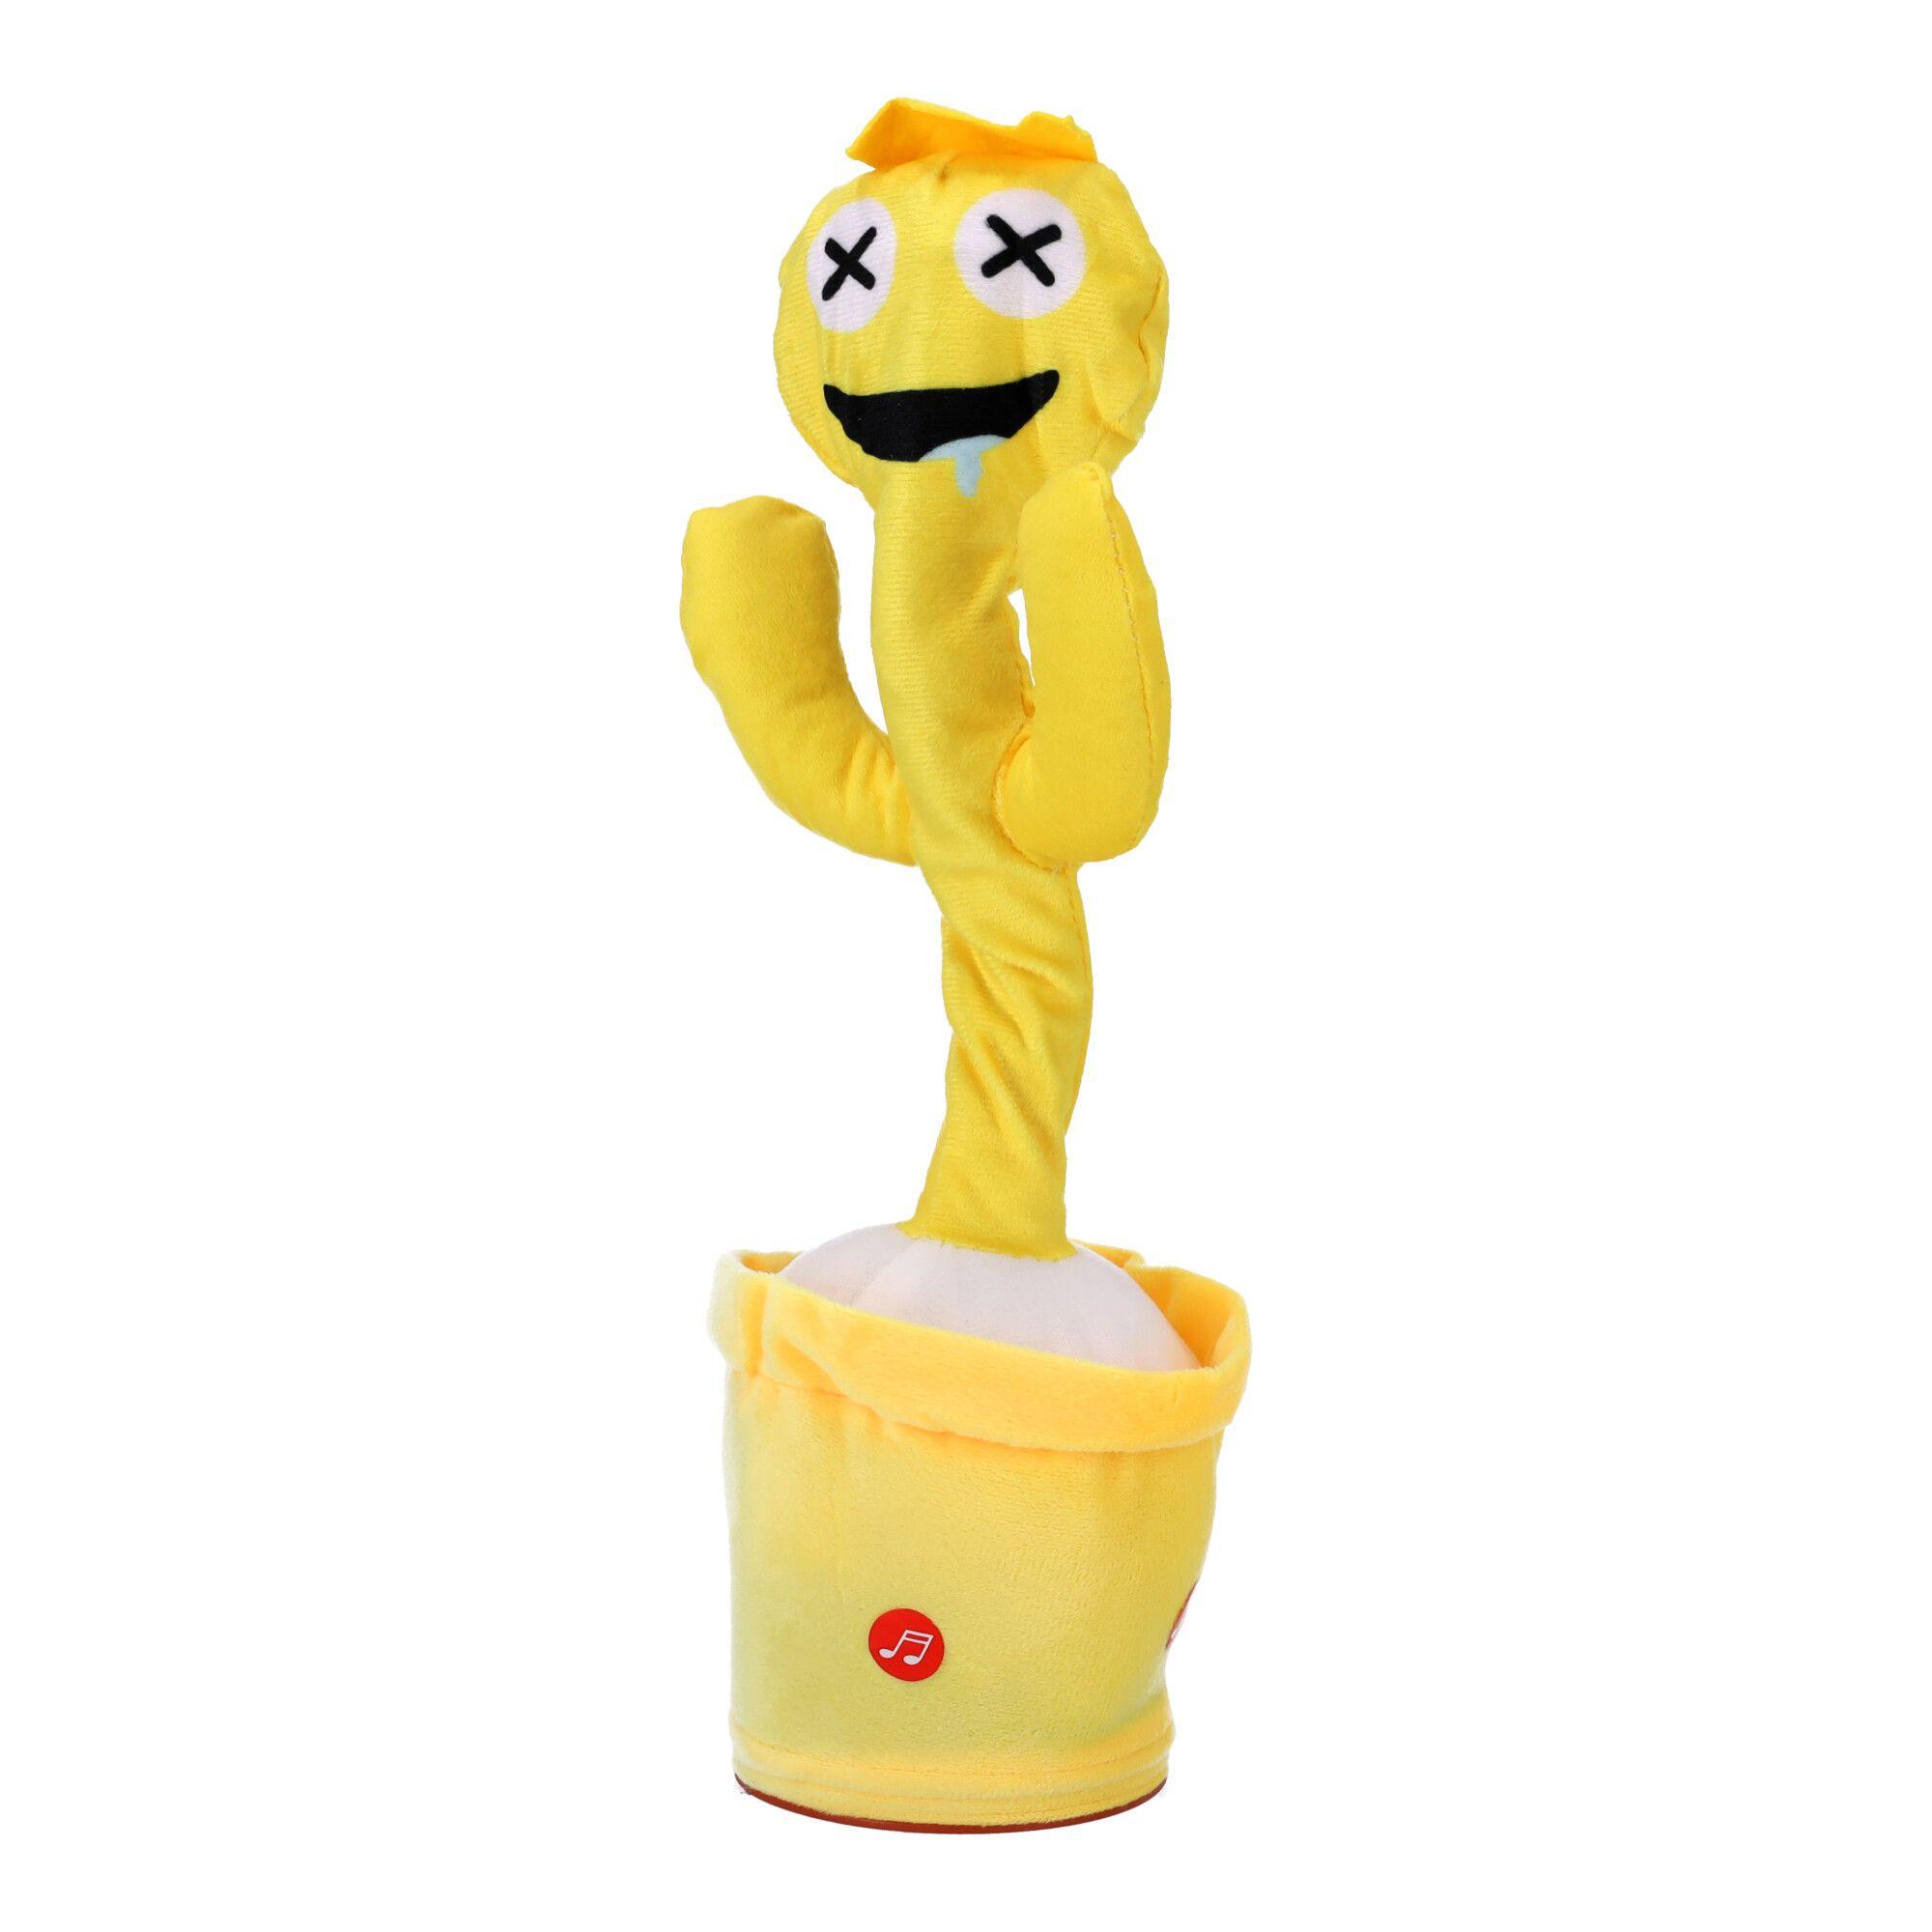 Children's toy - Dancing and singing ROBLOX RAINBOW FRIENDS mascot